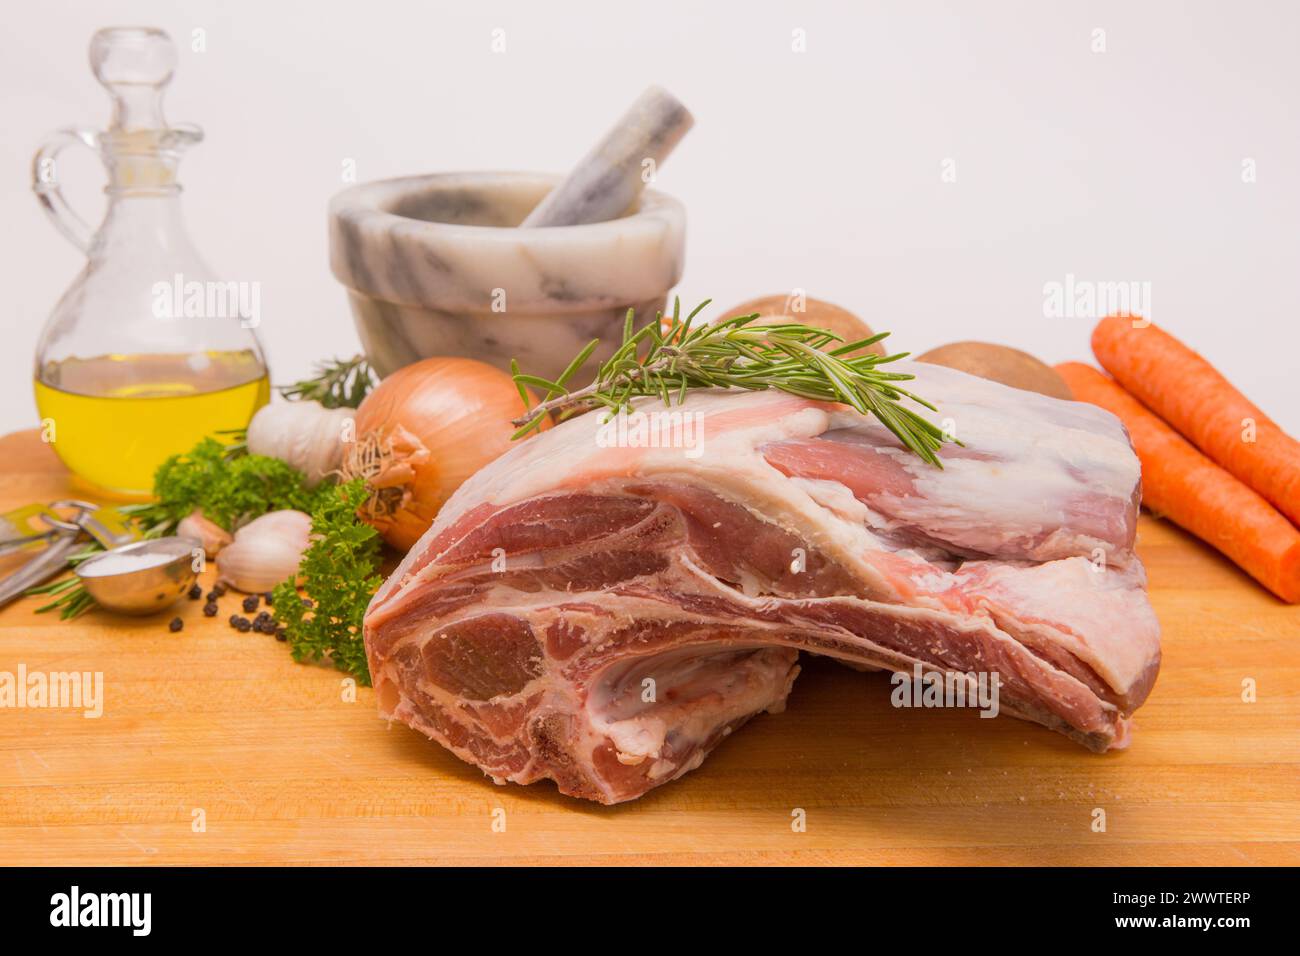 Fresh raw Shoulder of lamb on a wood cutting board with fresh herbs, salt and peppercorns , olive oil, onions, potatoes and a mortar and pestle Stock Photo